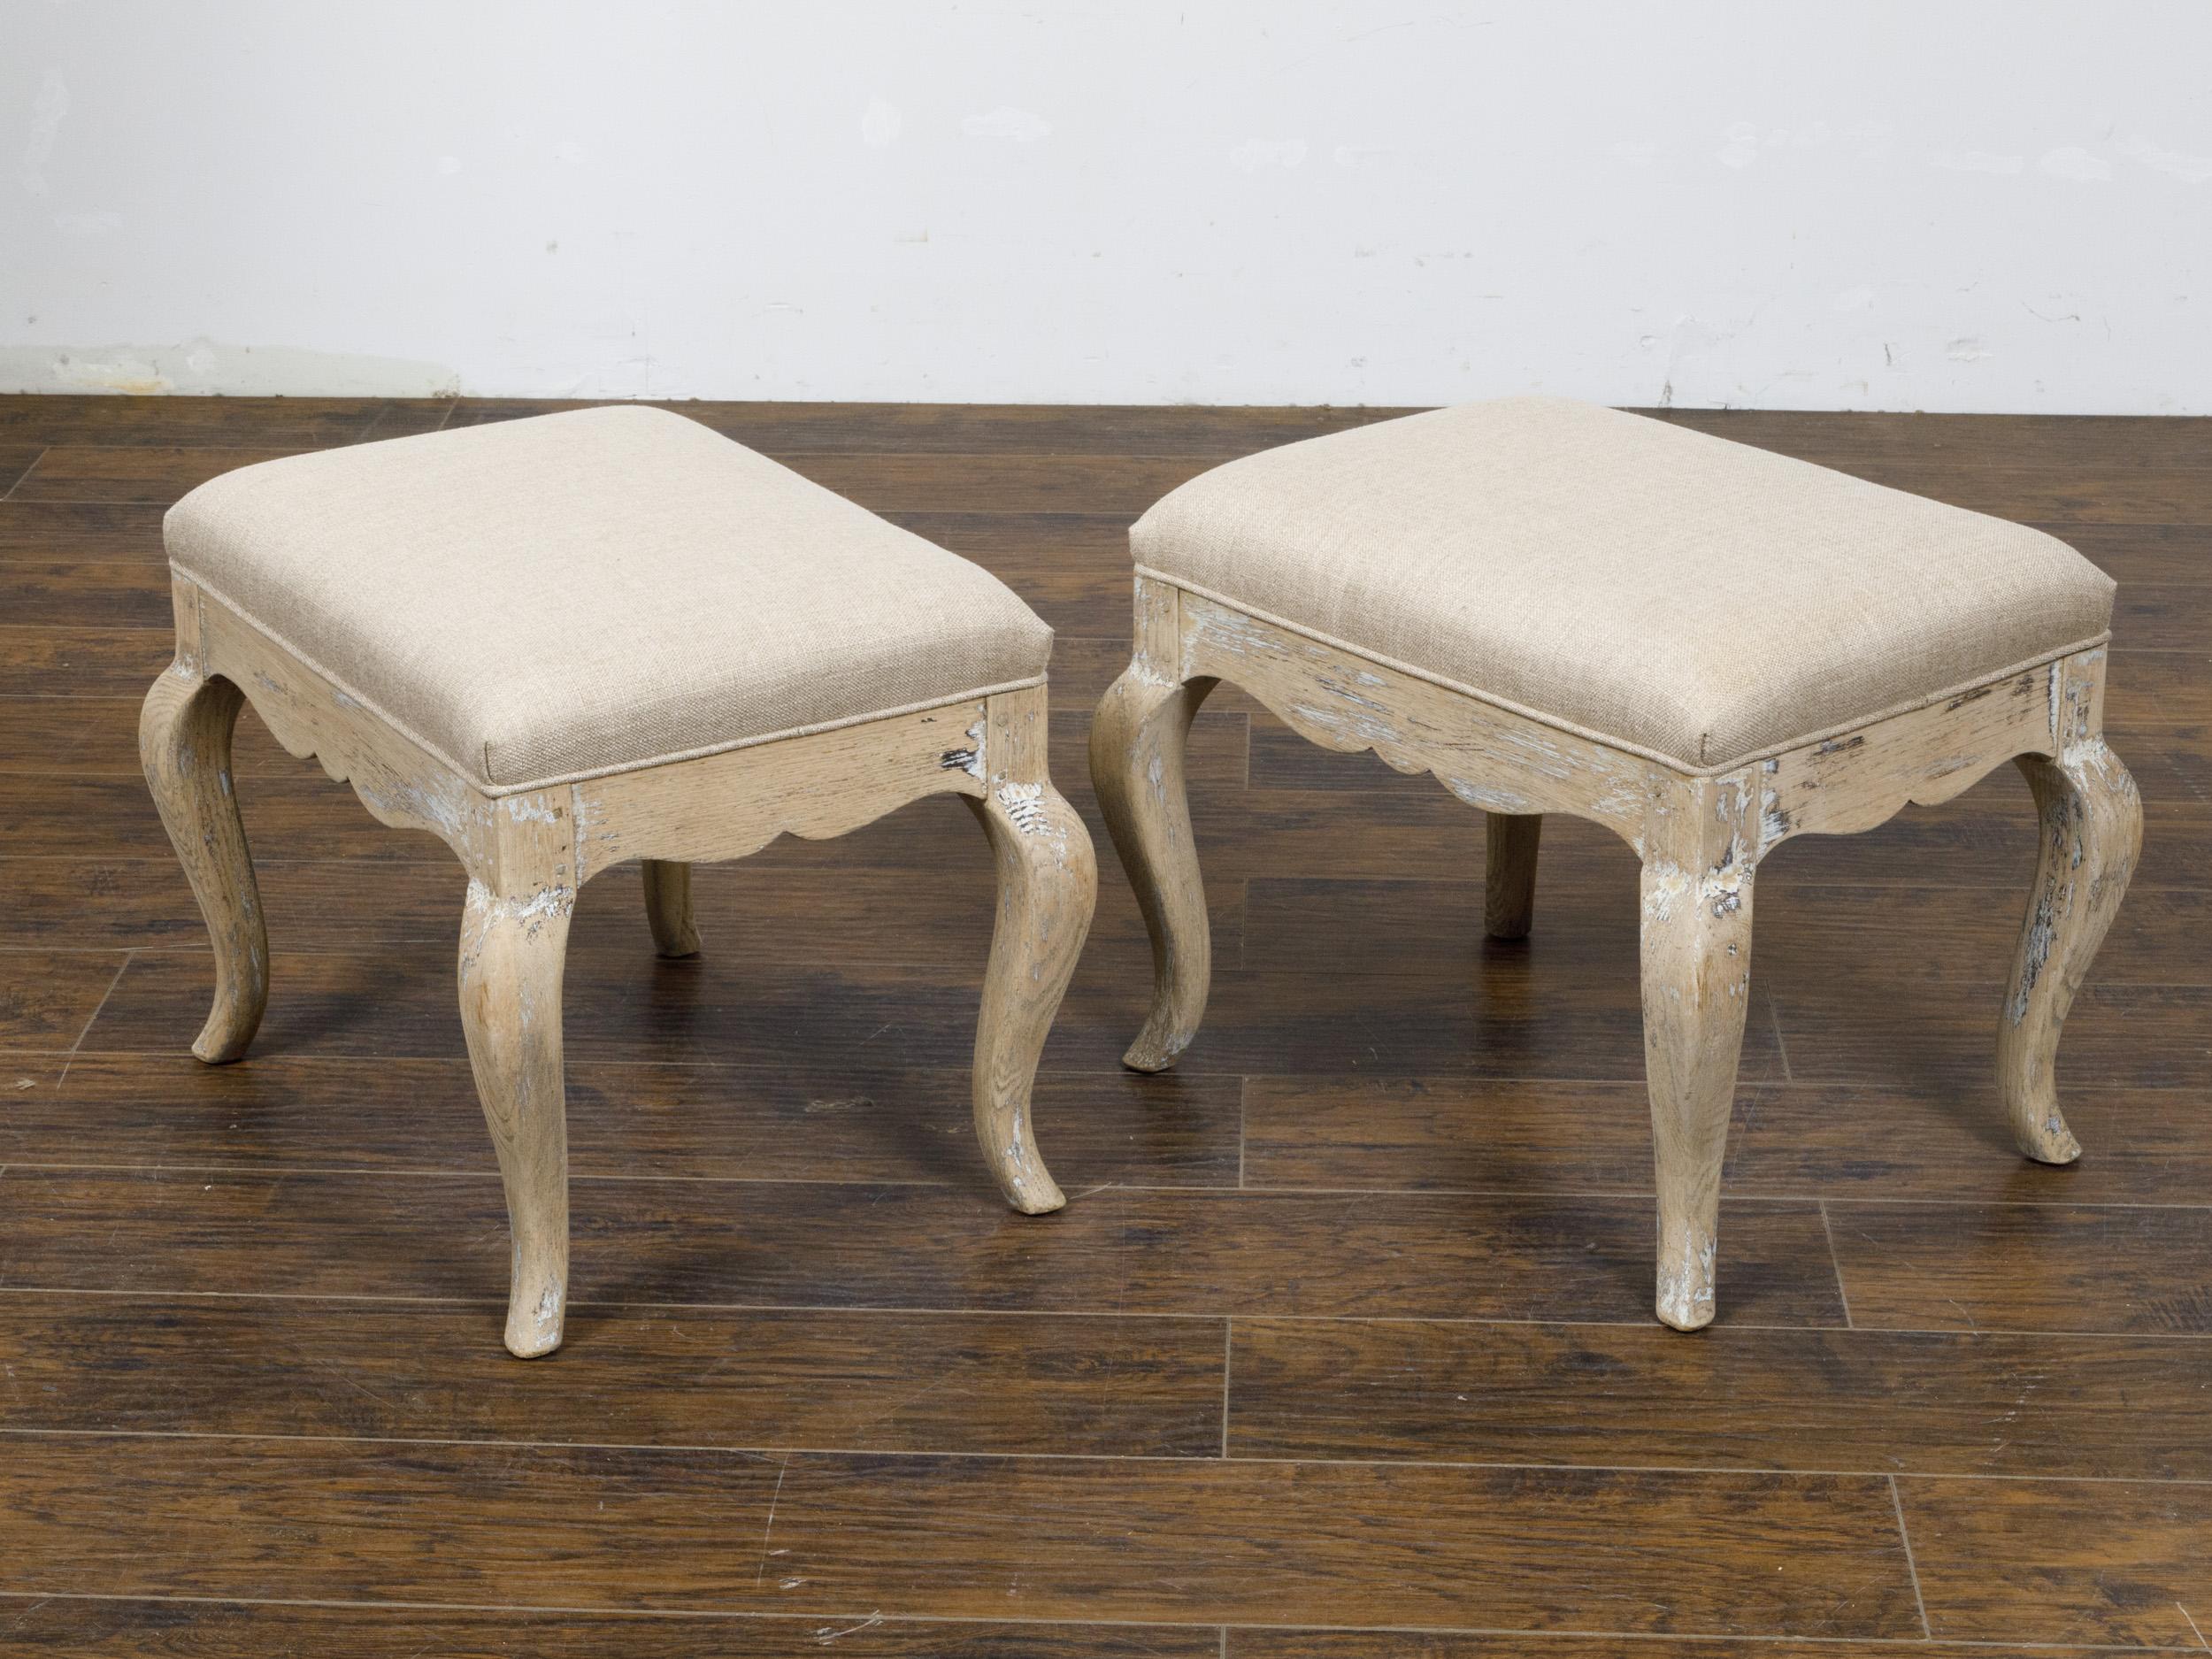 A pair of French Rococo style oak stools from the Midcentury period, with scraped back finish, scalloped aprons, cabriole legs and new custom linen upholstery. Imbued with the charm of the French Rococo style, this pair of mid-century oak stools